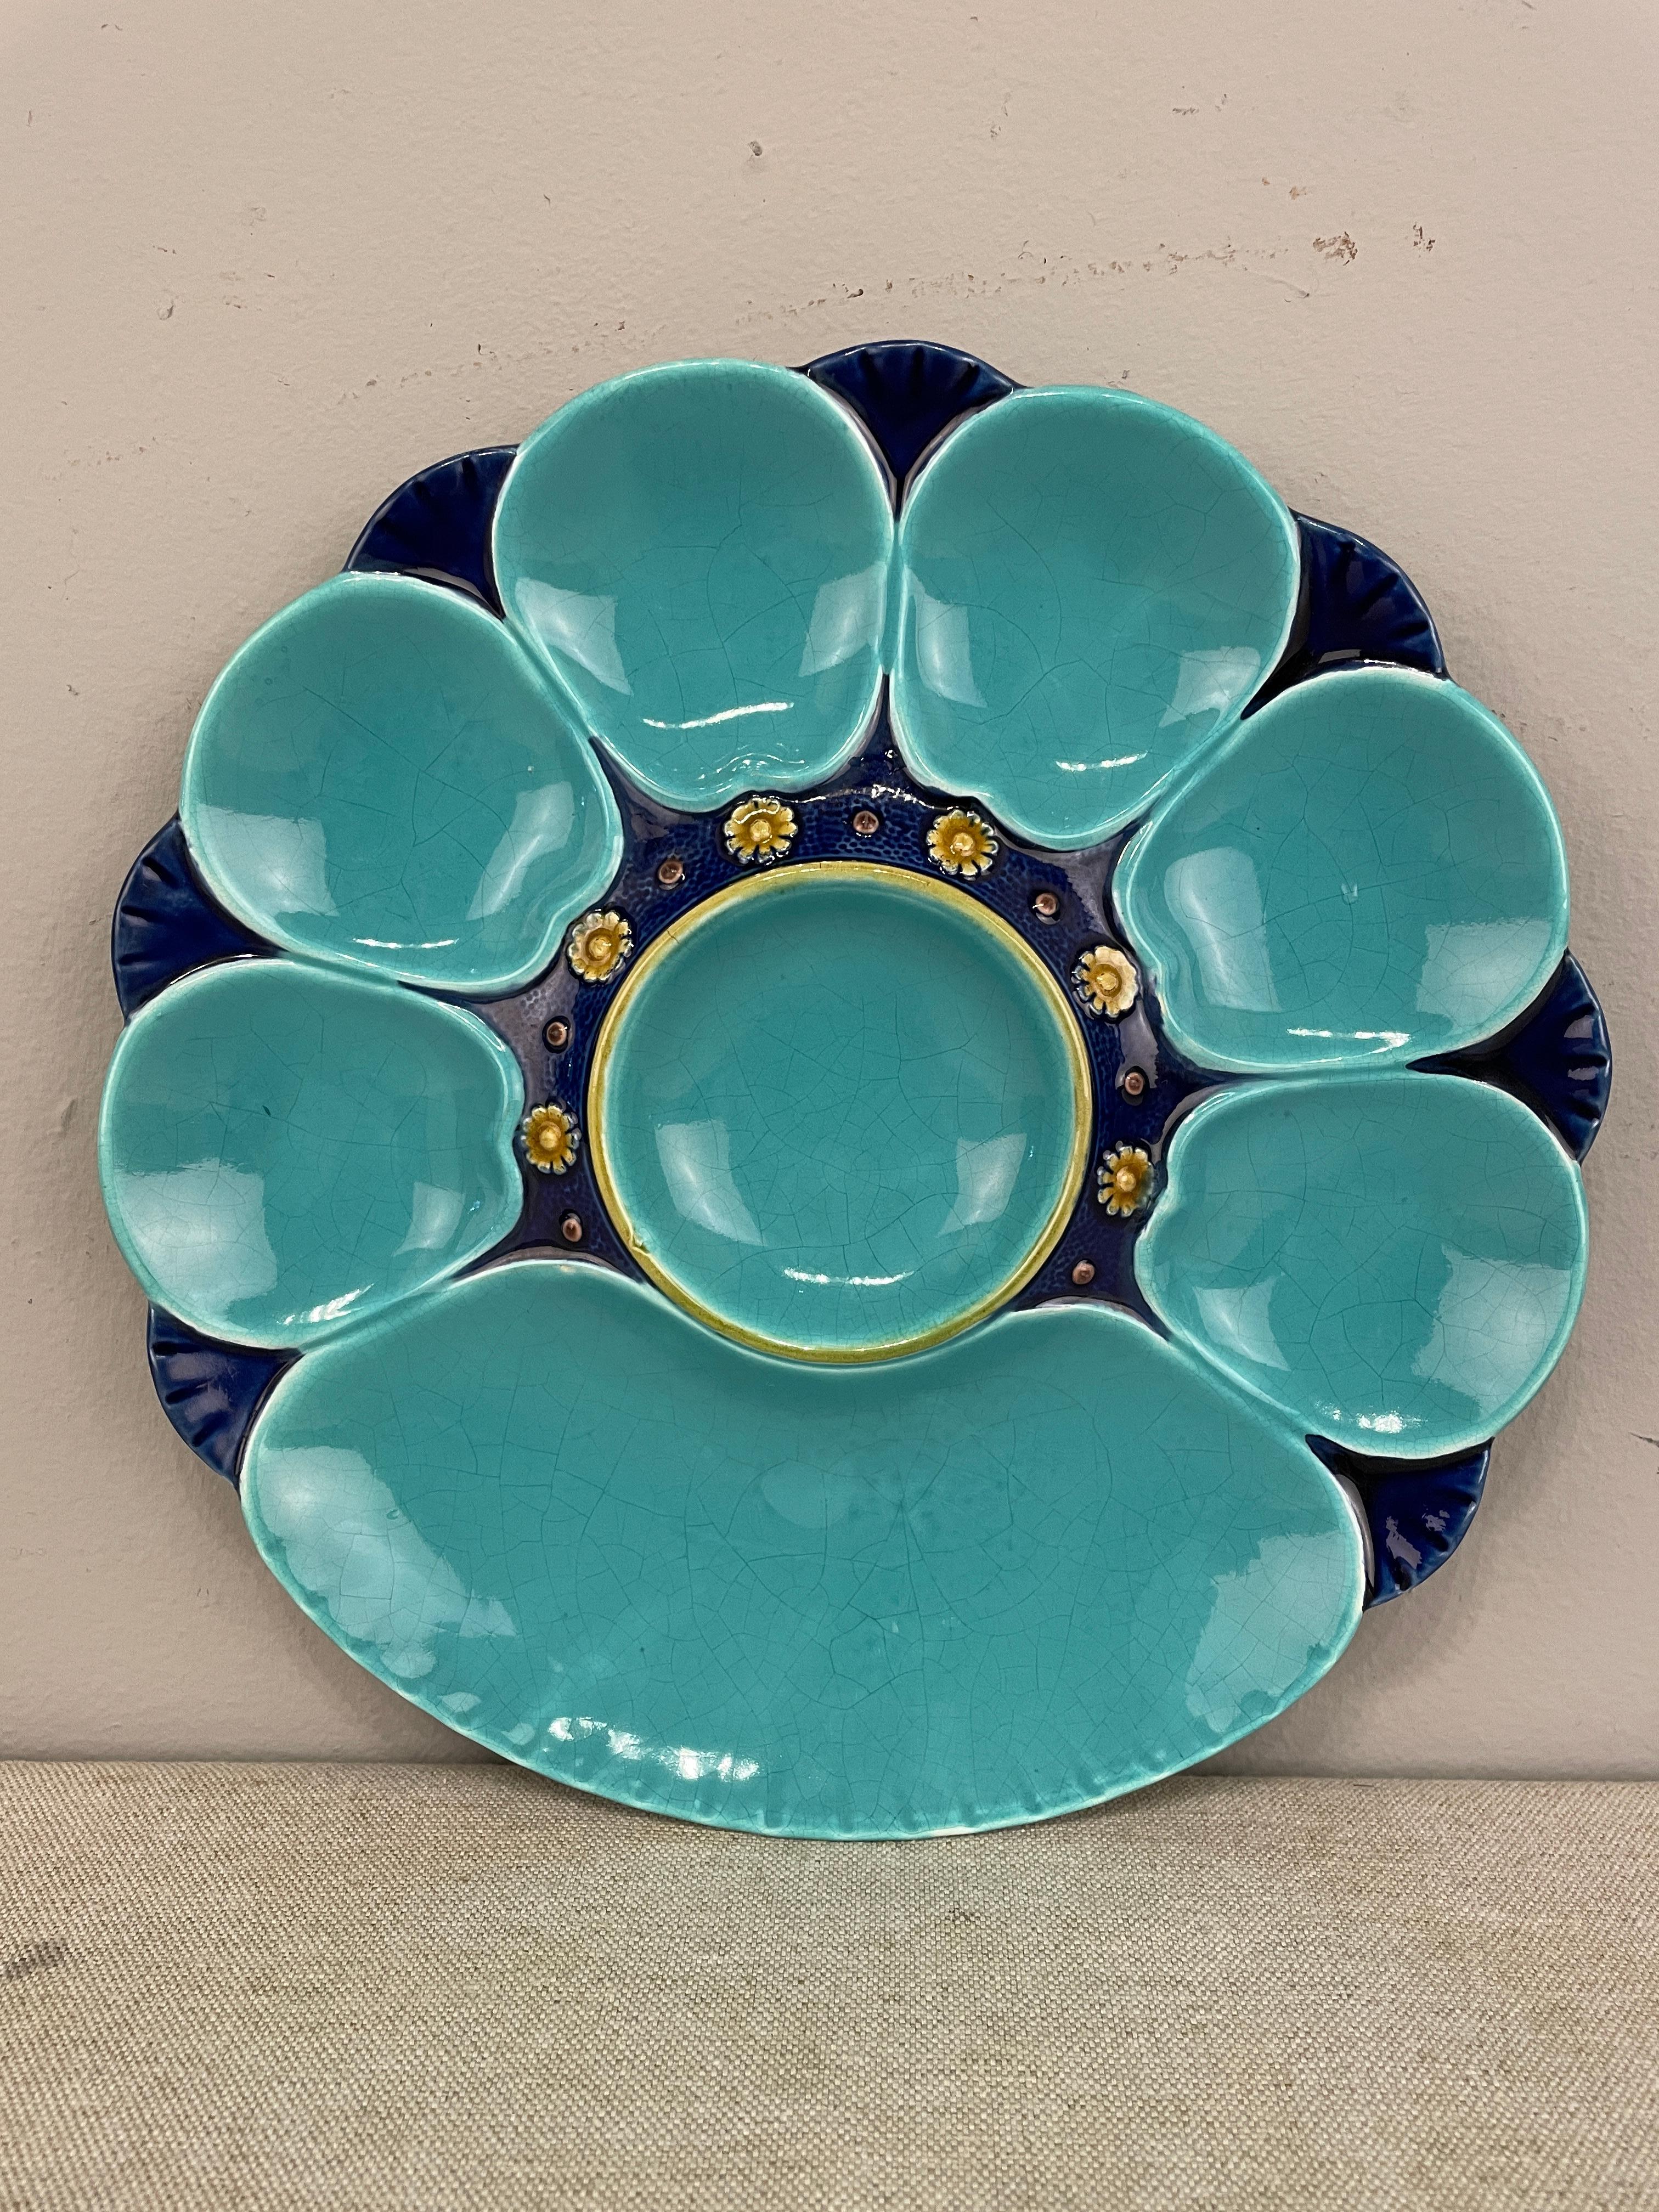 A good English Majolica plate, dated 1885 and marked Minton, with turquoise and cobalt blue oyster plate with a central well surrounded by small ochre flowers. Six small and one large shell shaped well around the rim.
Cobalt stipple ground with